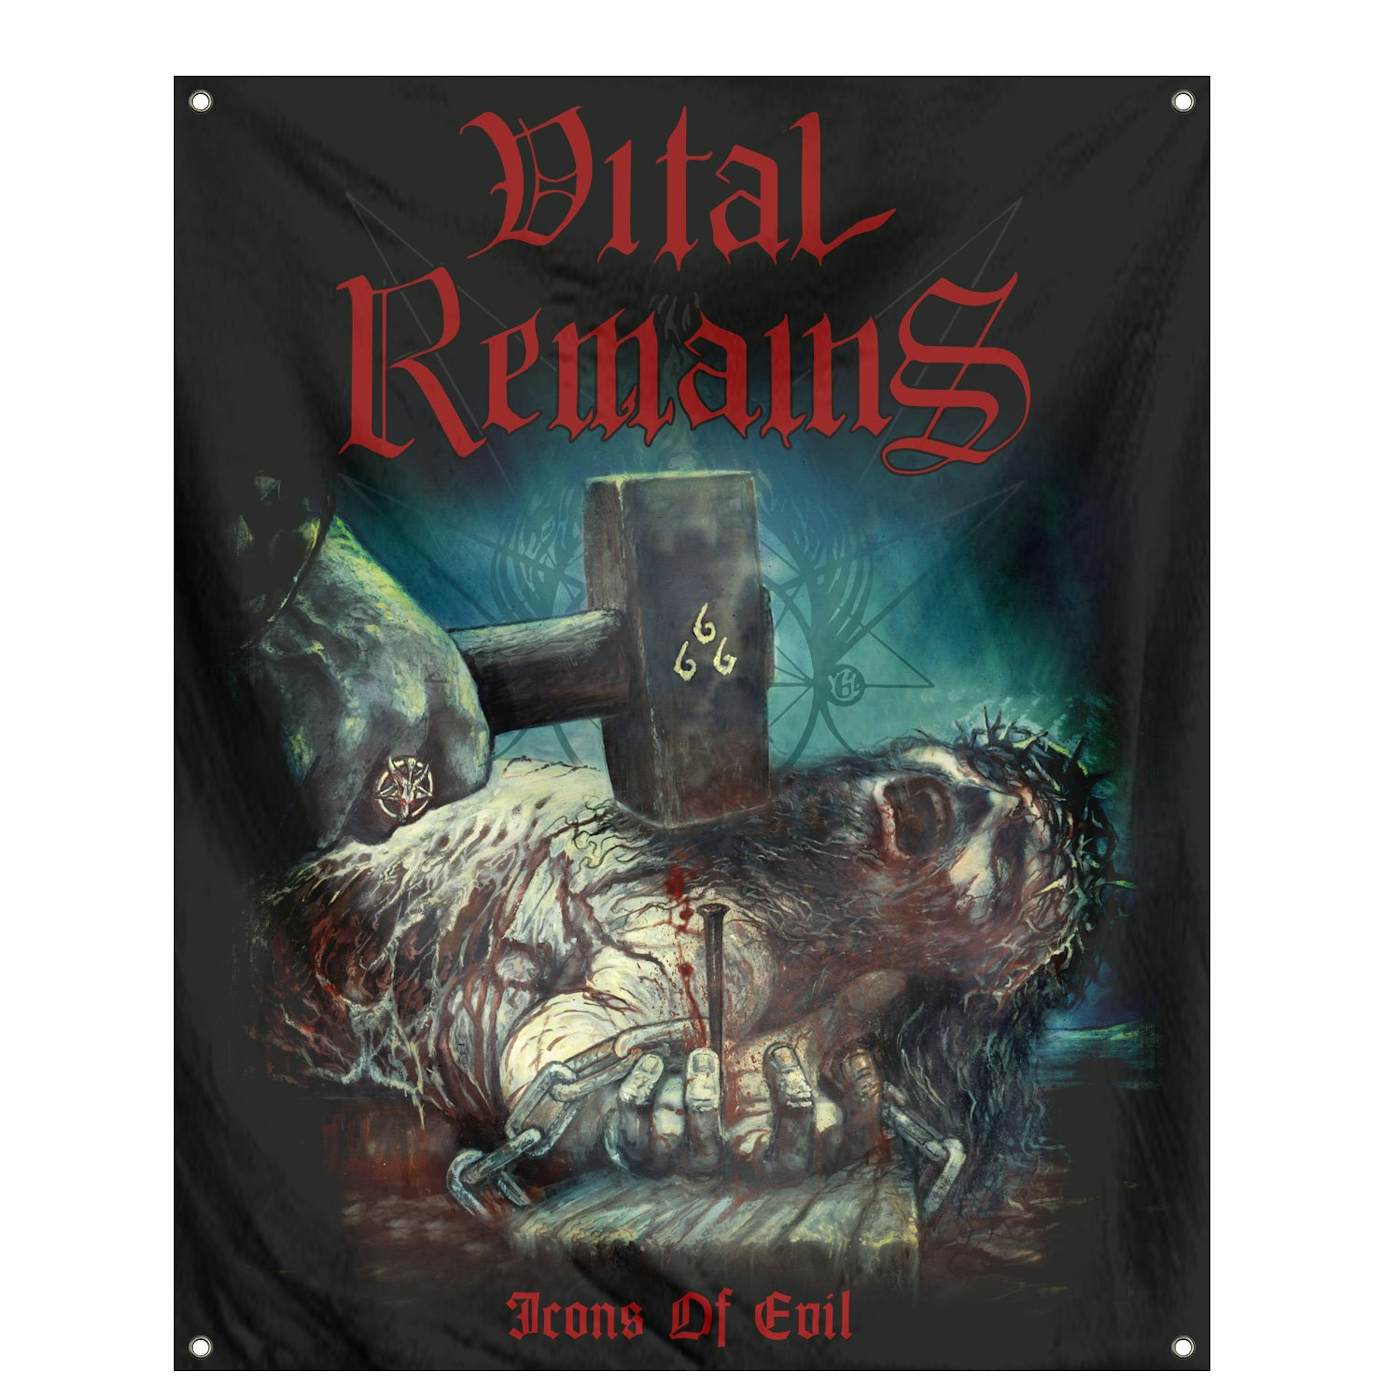 Vital Remains "Icons Of Evil" Flag